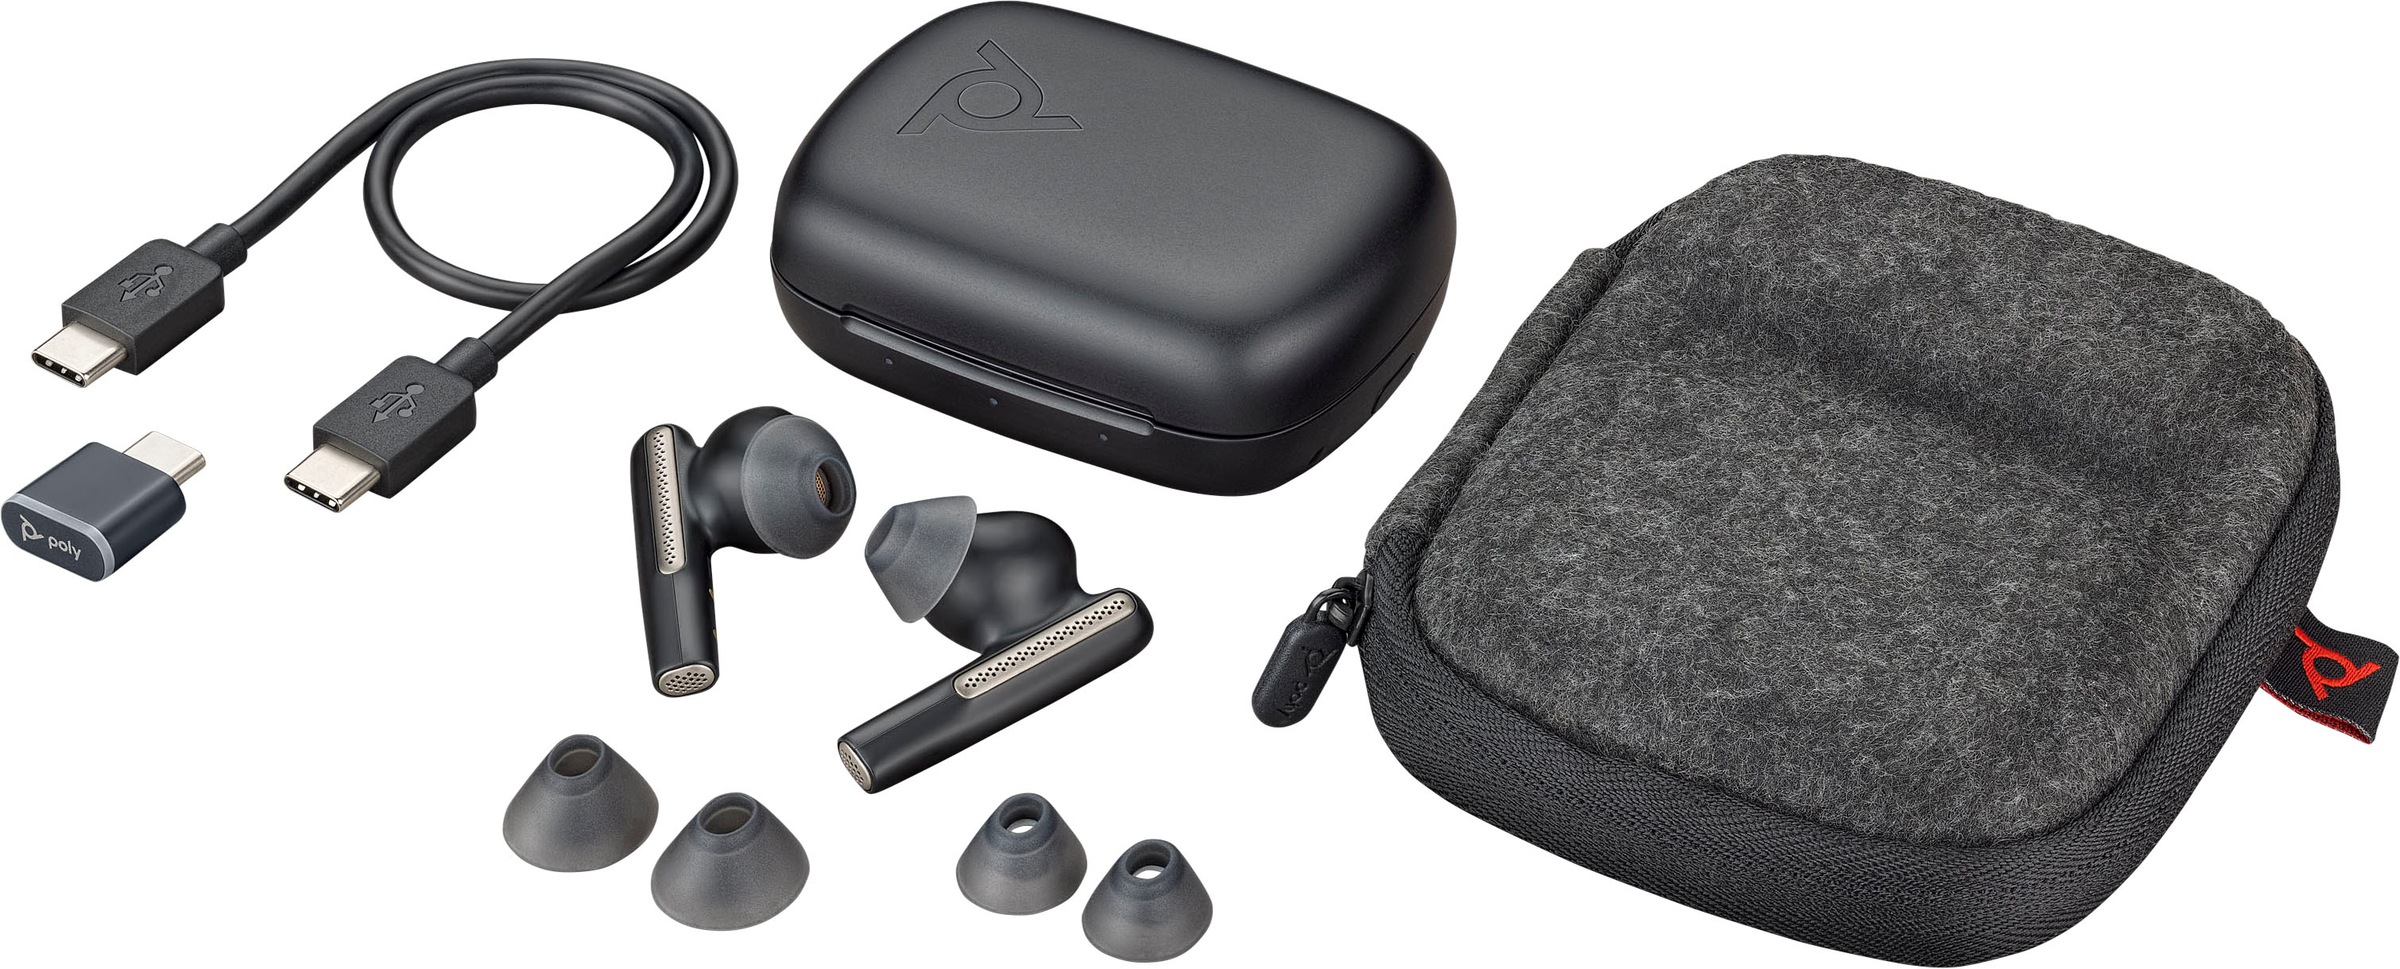 Poly wireless In-Ear-Kopfhörer »Voyager Free 60«, Active Noise Cancelling ( ANC) | BAUR